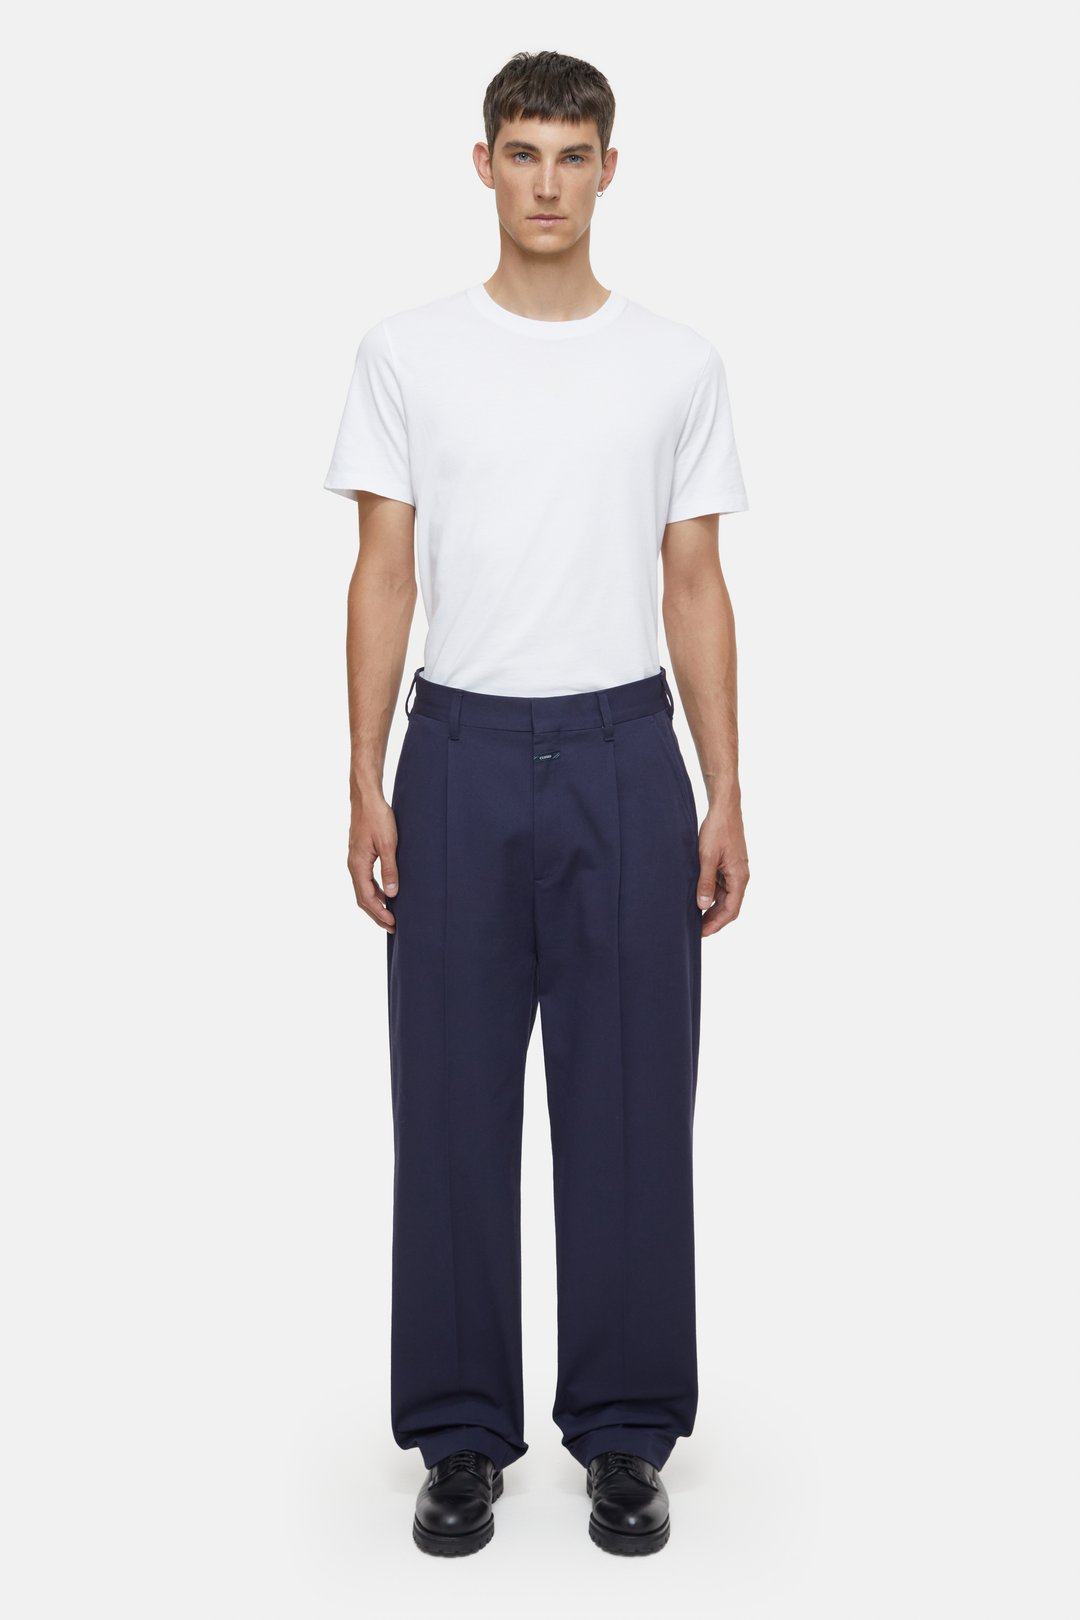 WIDE PANTS - STYLE NAME BLOMBERG WIDE | CLOSED